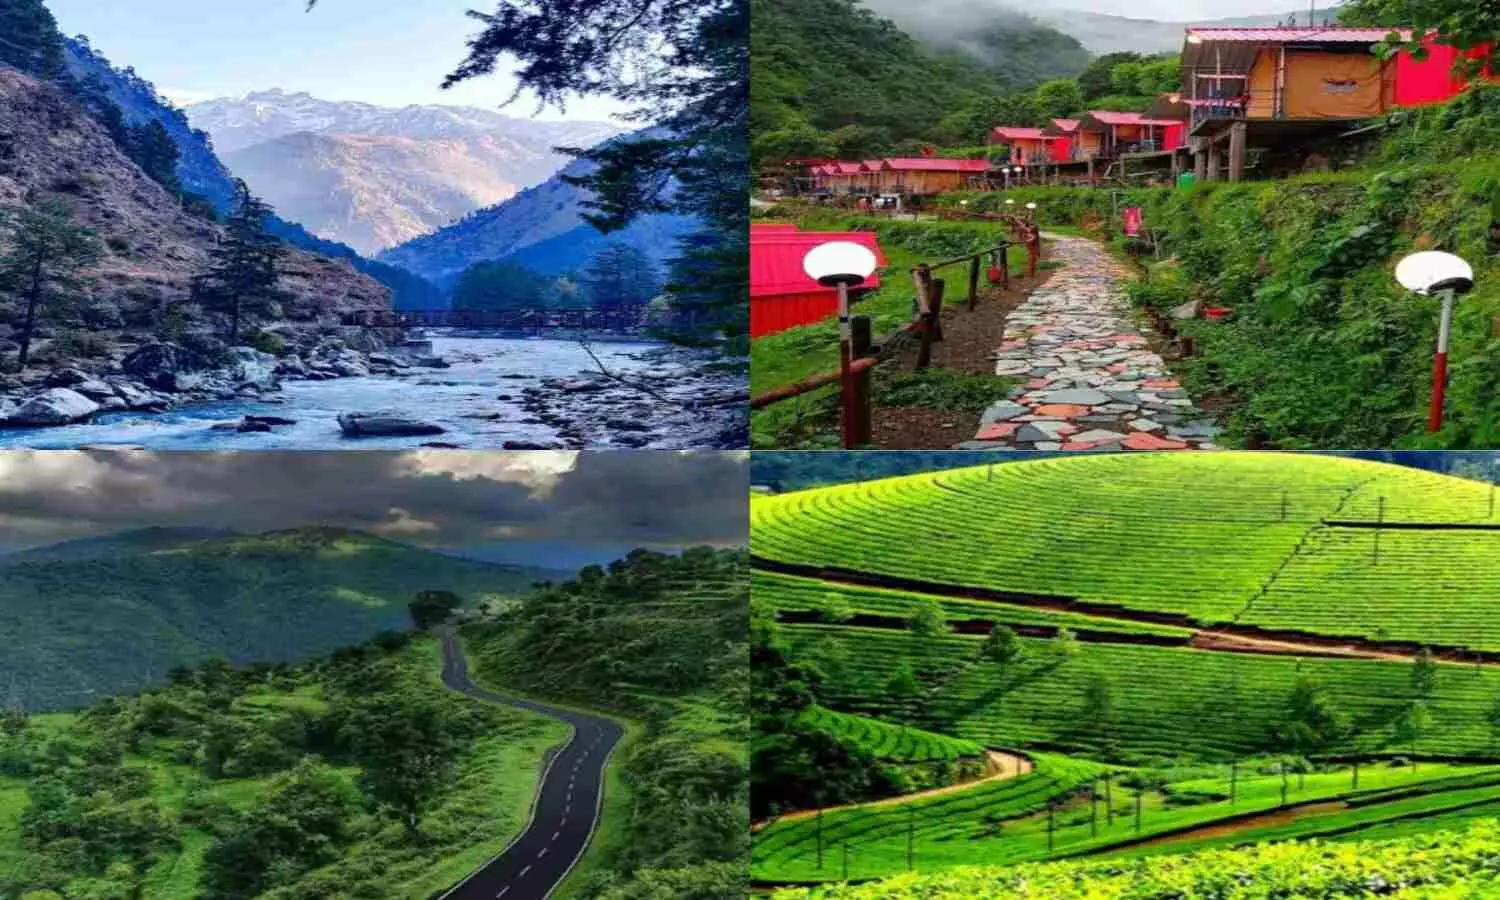 Cheapest Hill station in India